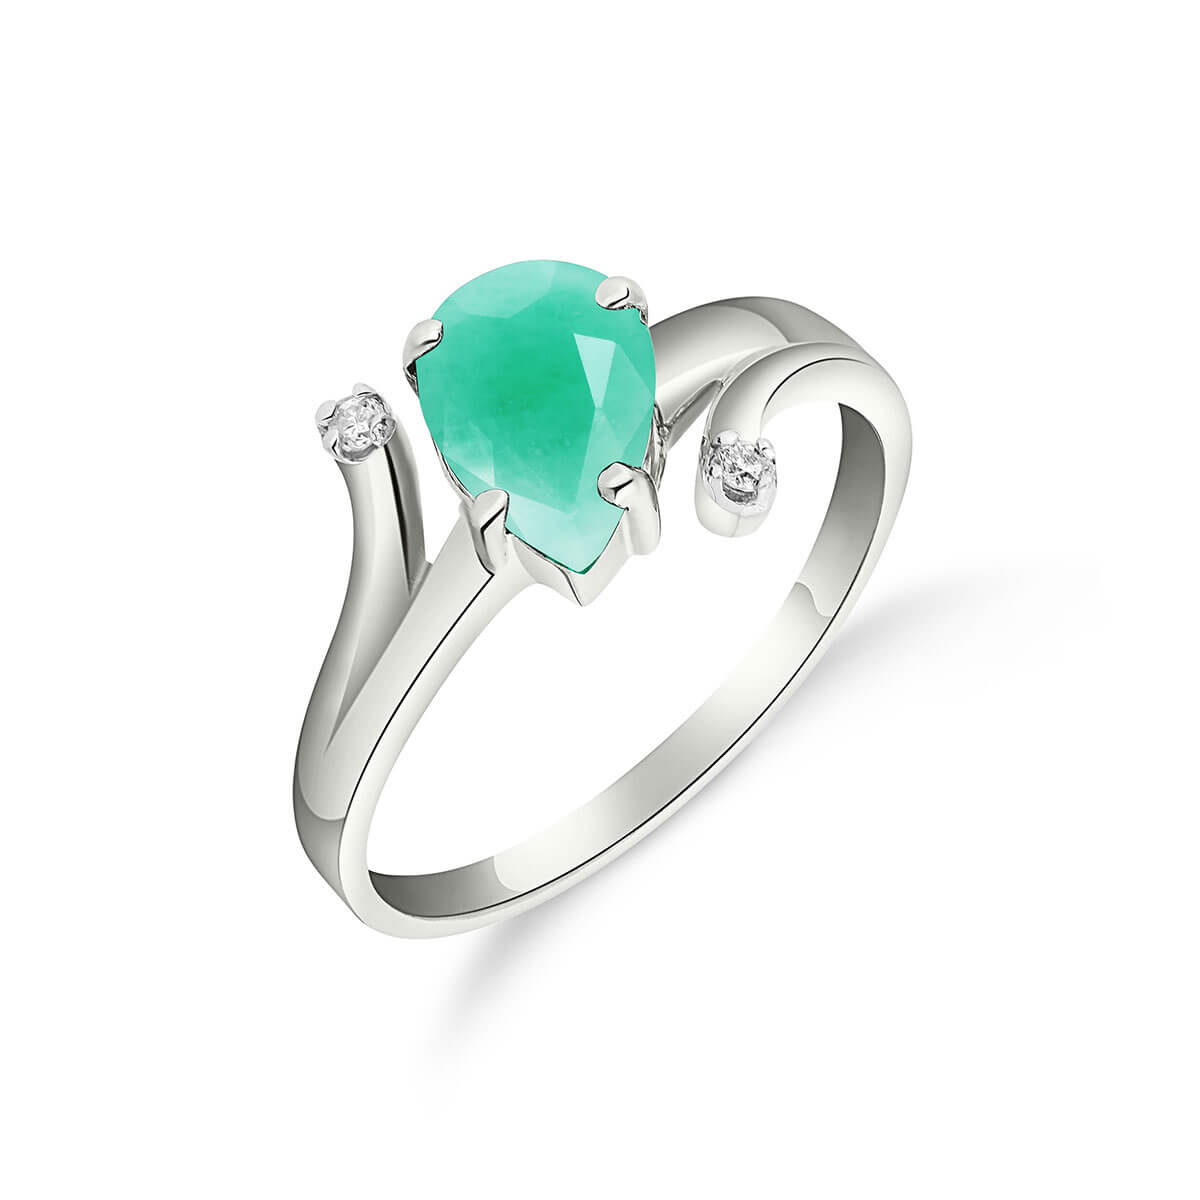 Emerald & Diamond Flank Ring in 9ct White Gold